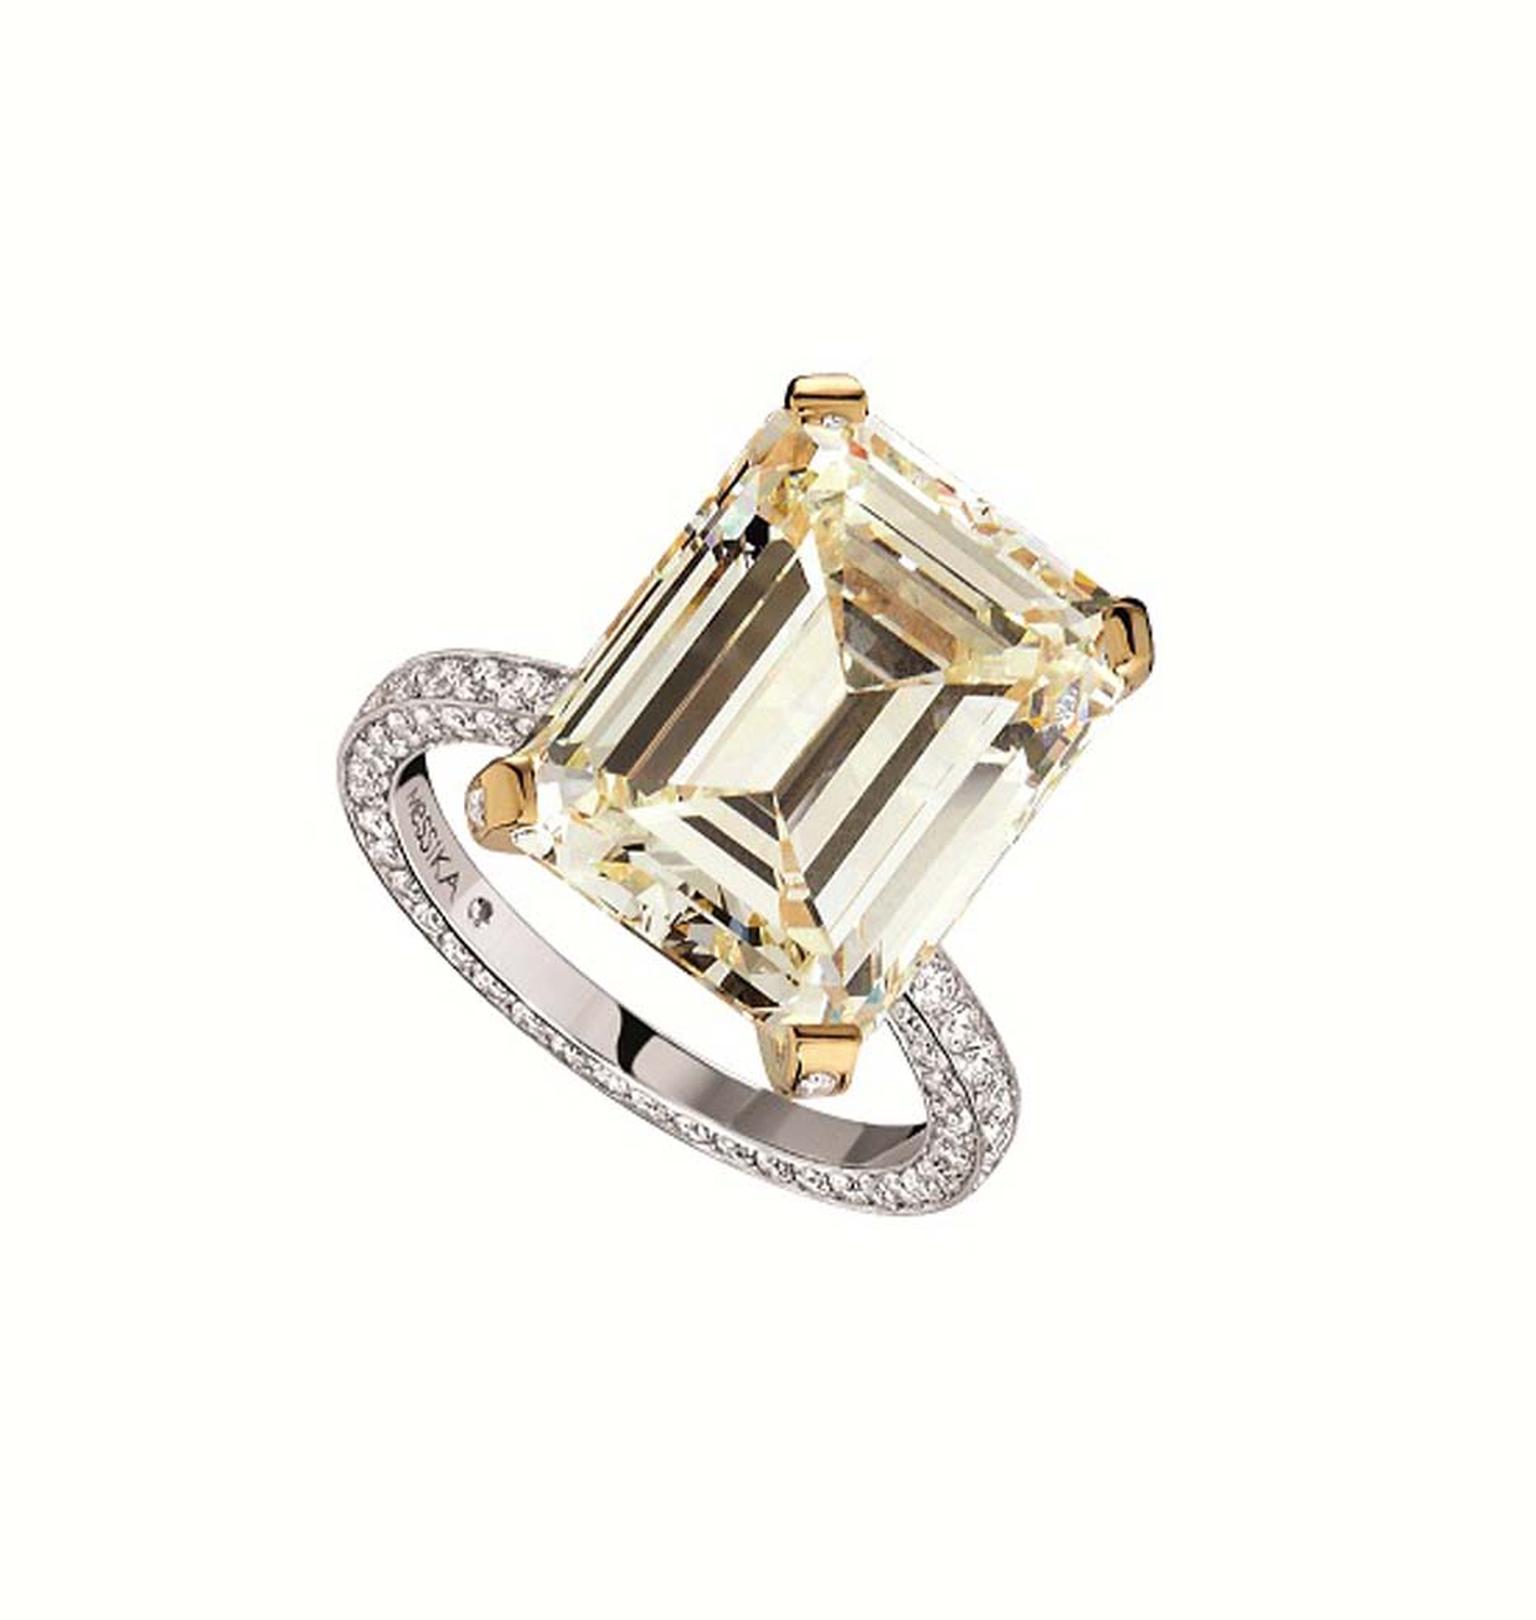 Messika 11.73ct emerald-cut yellow diamond engagement ring with a white diamond pavé band (£POA).